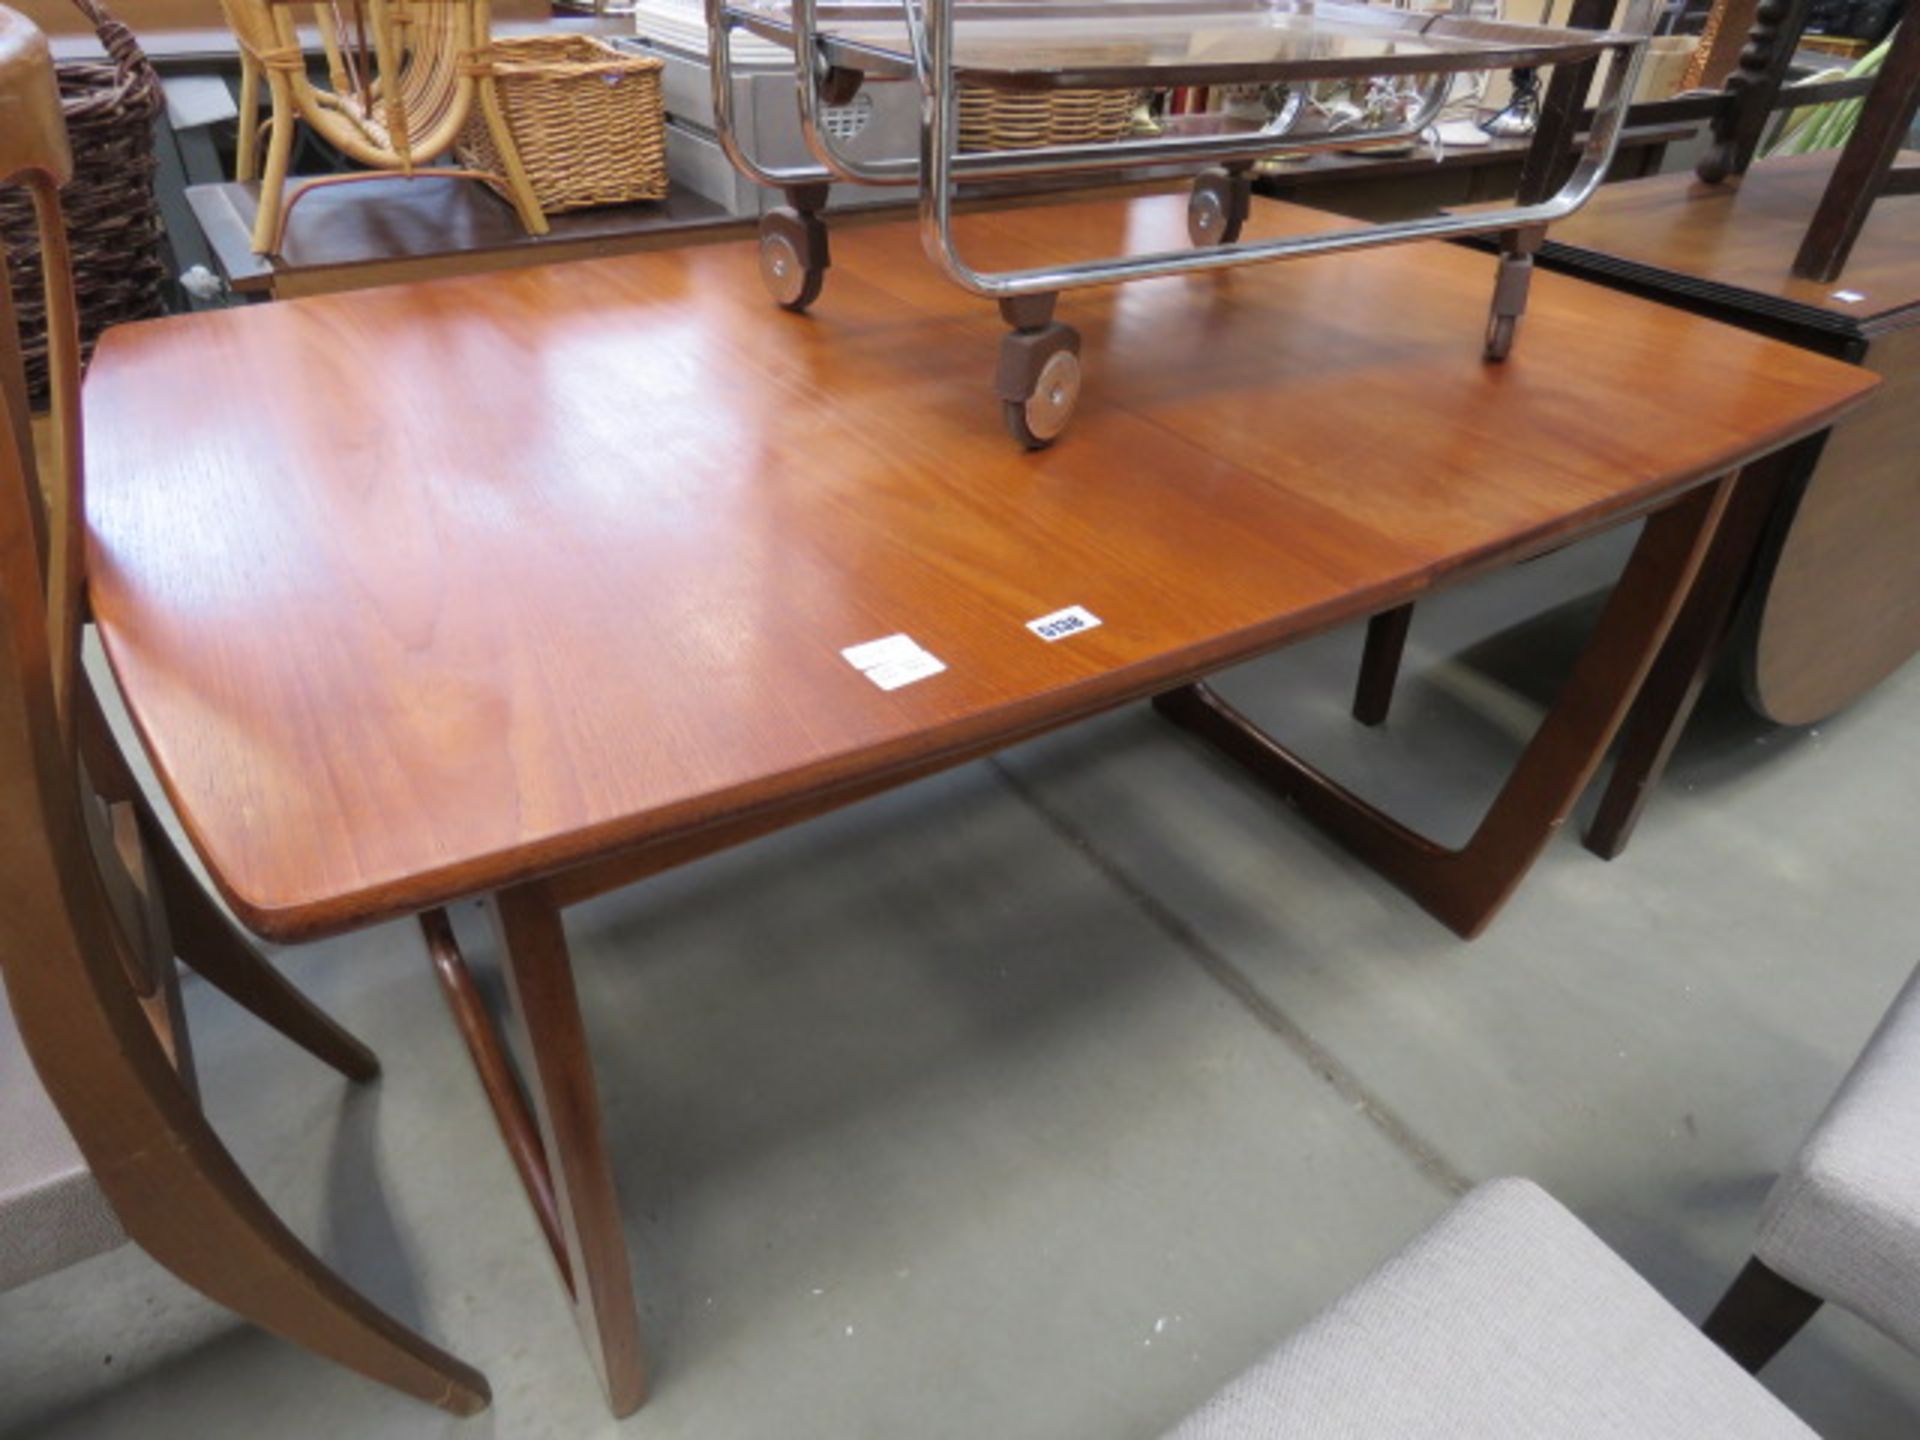 Portwood teak extending dining table Condition is fair with some marks